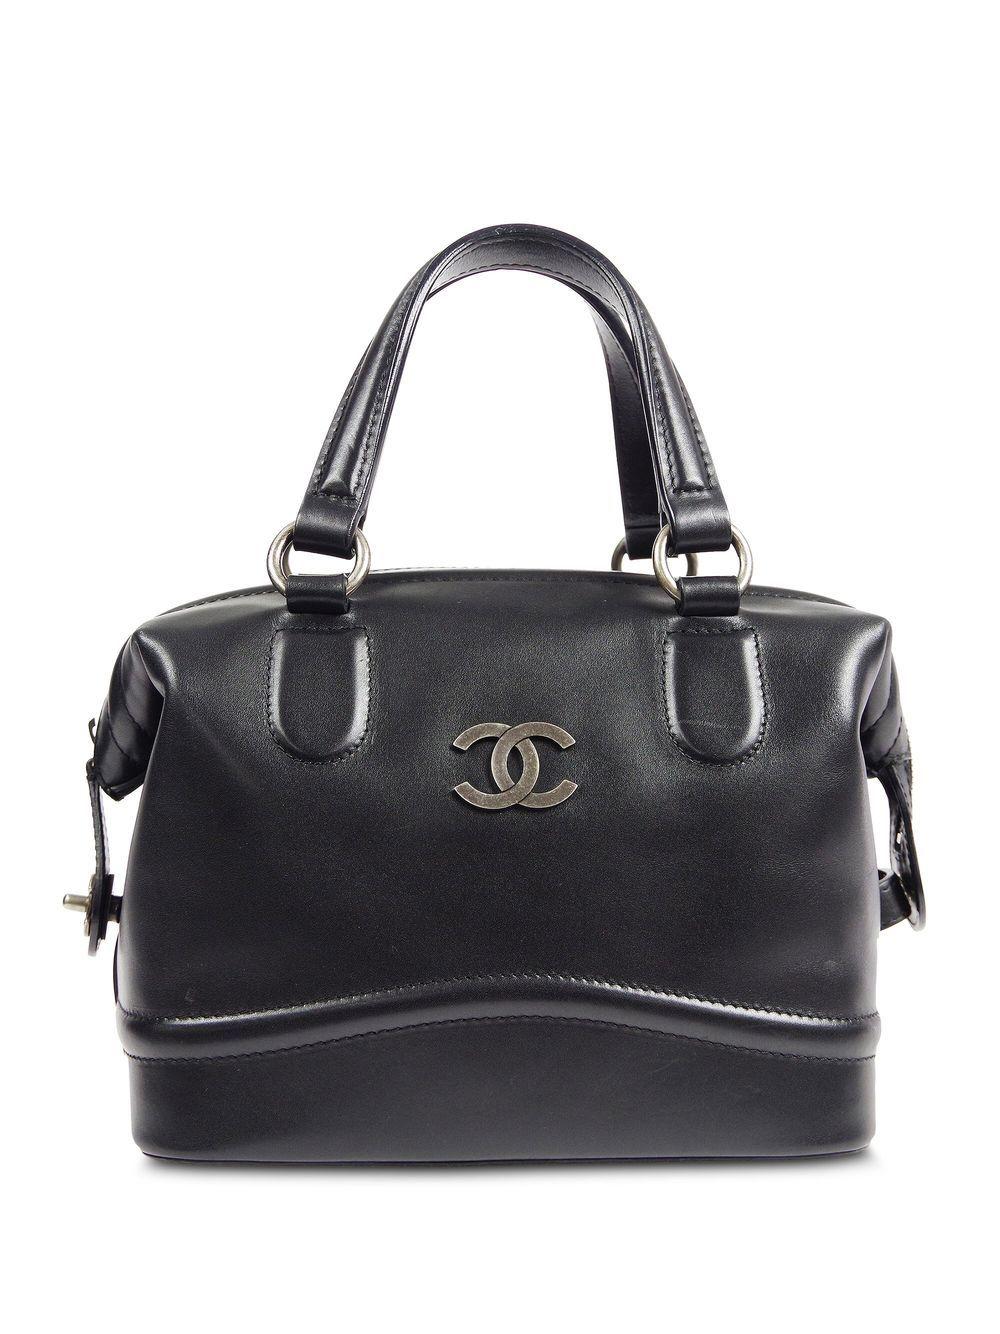 Chanel 2007 Vintage Calfskin Satchel Bowler Medium Tote Bag 

Year: 2007 {Vintage 17 Years}

Antique finish silver hardware

CC detail at front
Two handles
Zip around top closure
CC turn-lock closure 
Hidden snap for other side 
Structured